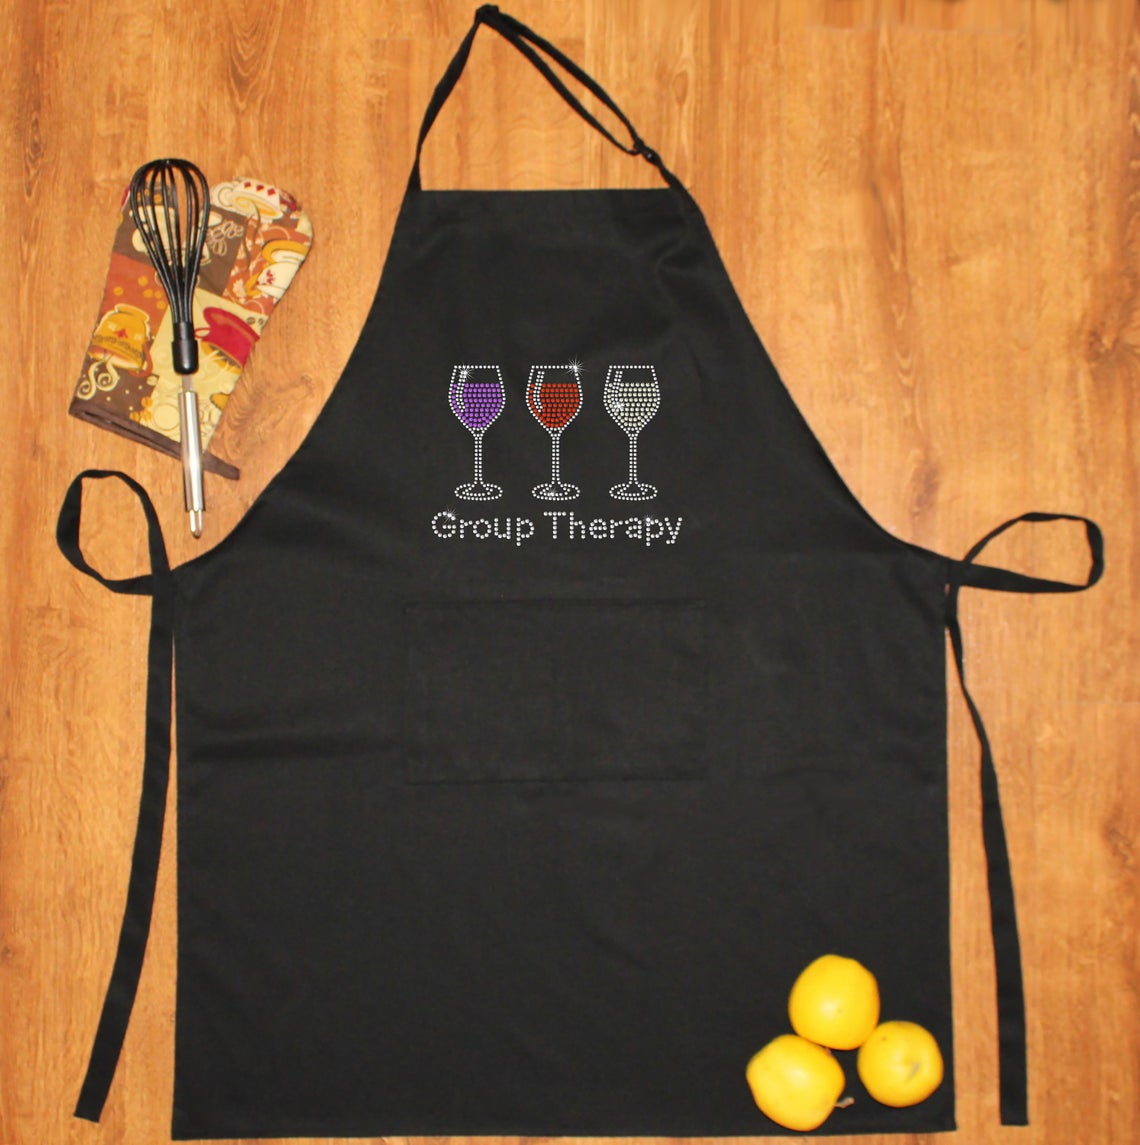 Rhinestone Embellished Black Apron with Group Therapy and 3 Drink Glasses